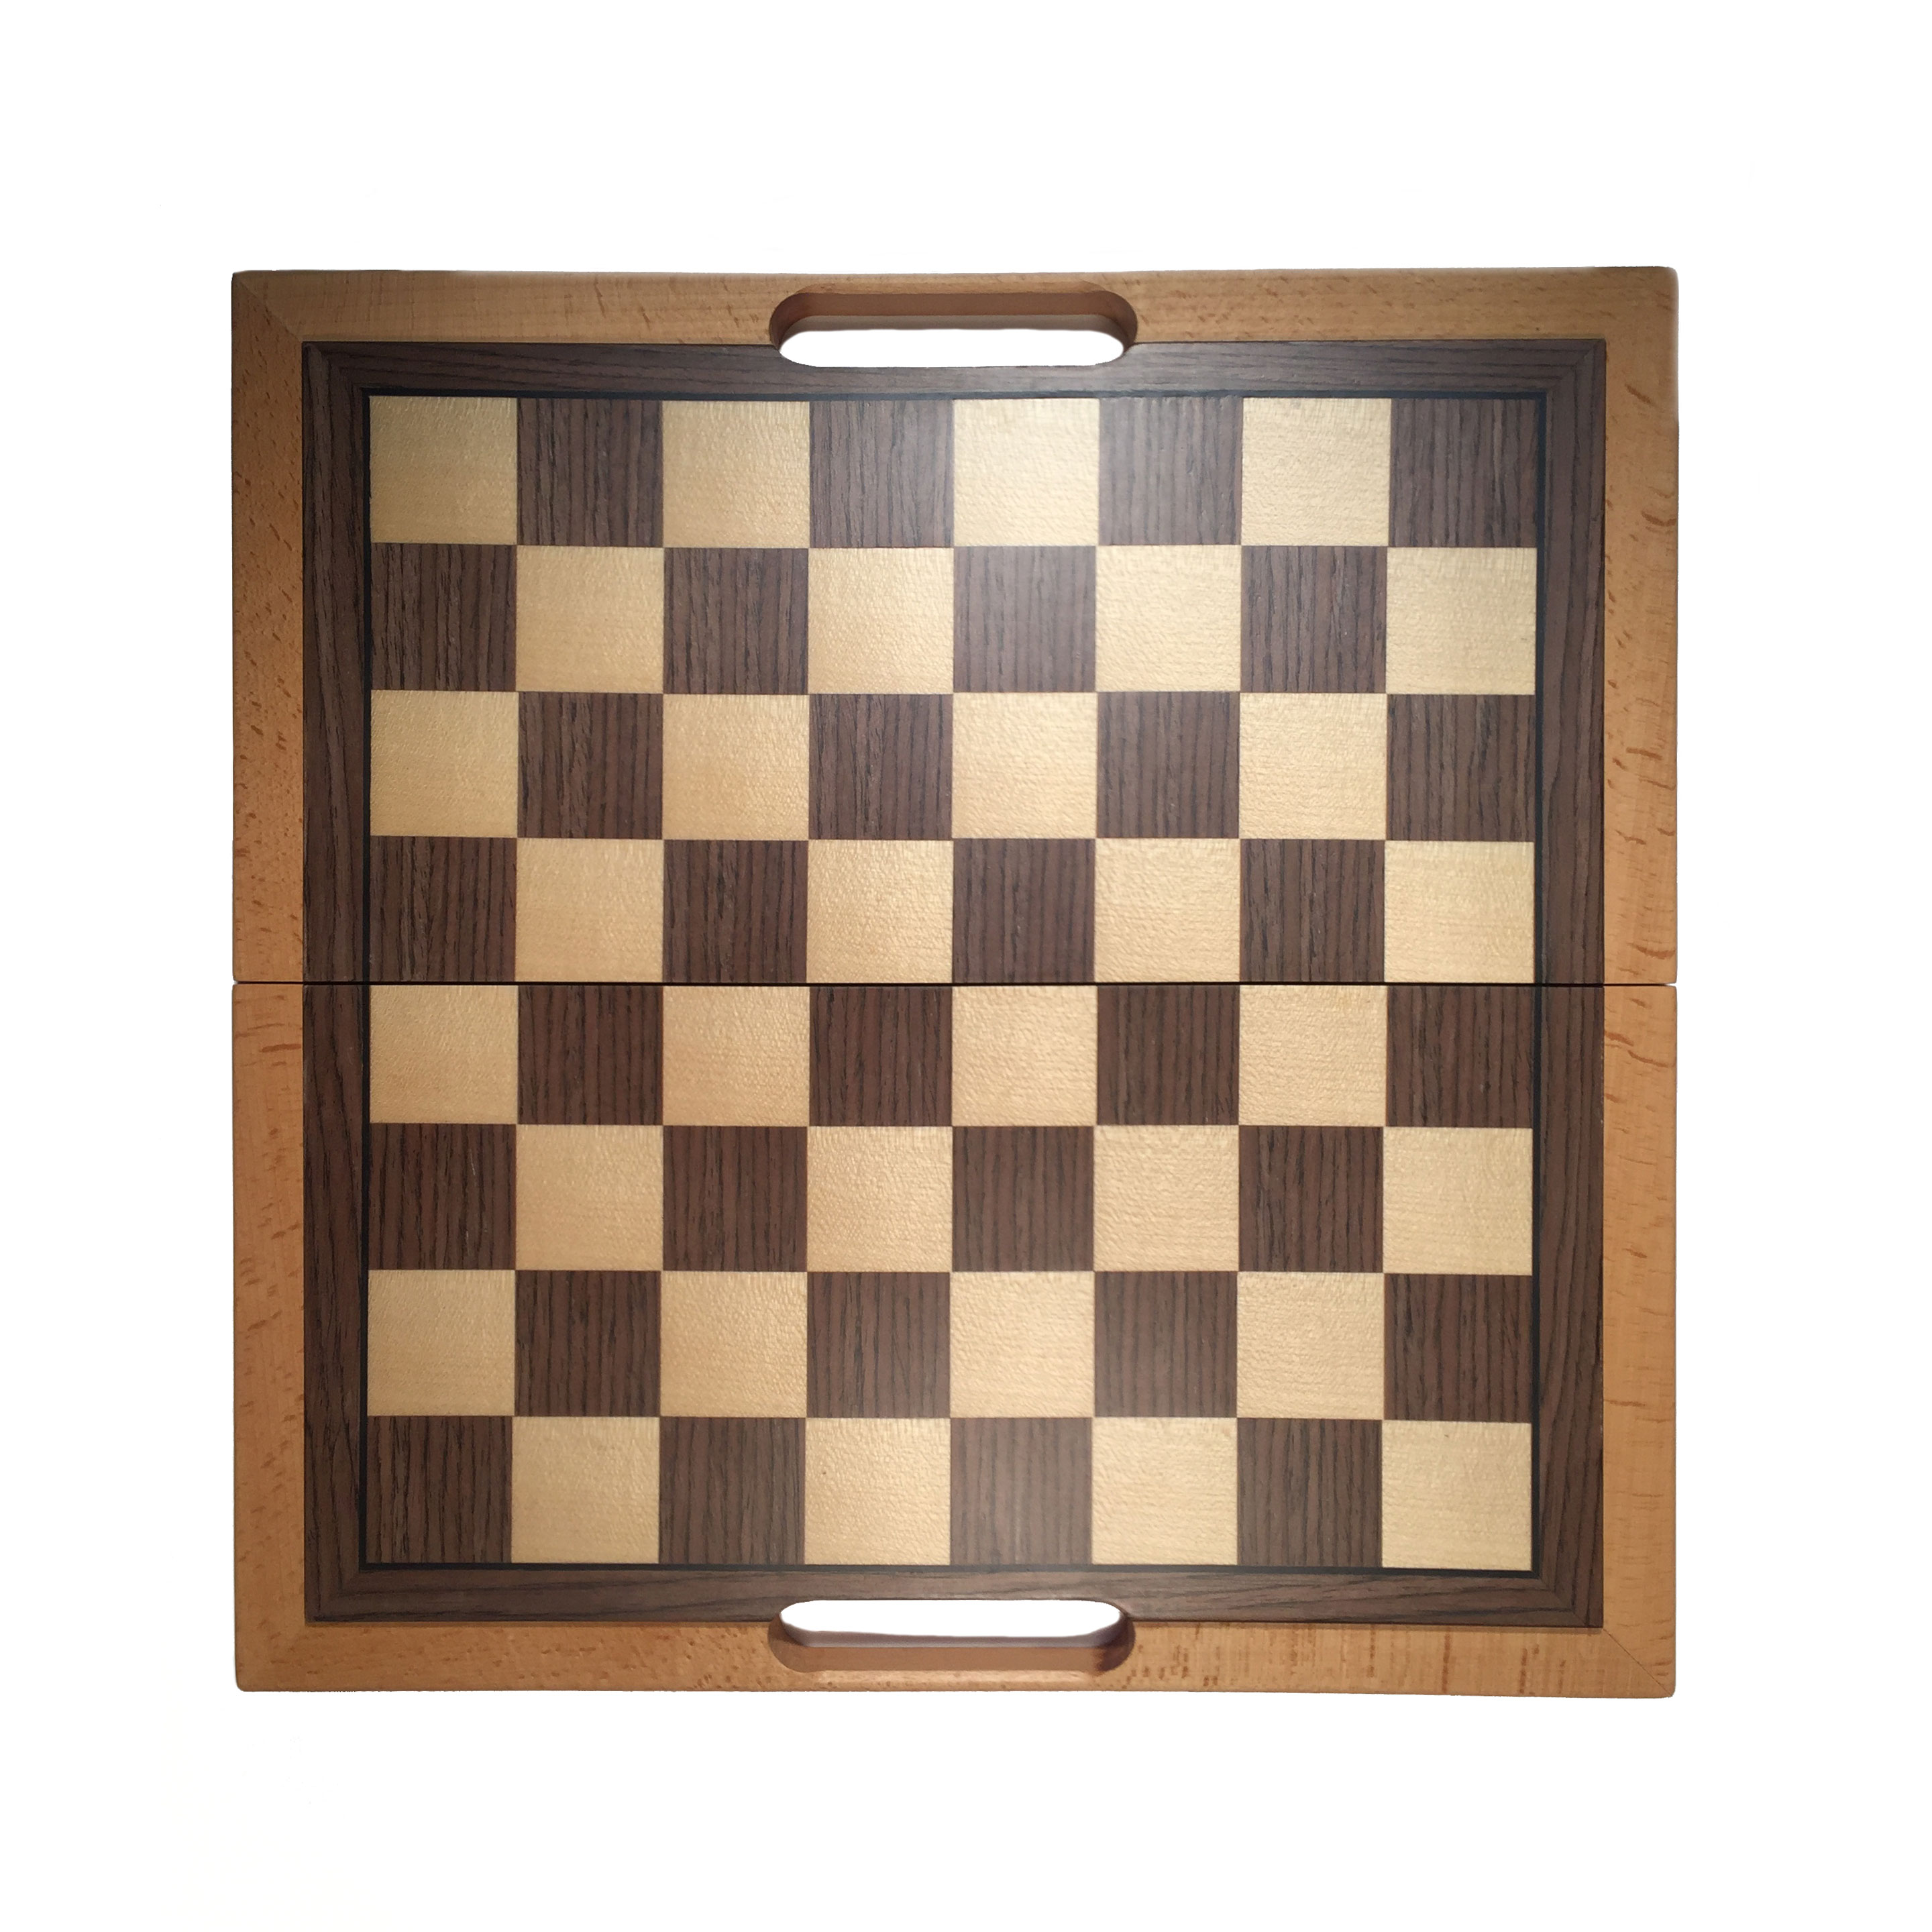 ♞ Hand Crafted Folding Wooden Chess Board & Draughts Set 24cm x 24cm ♚ Gift 